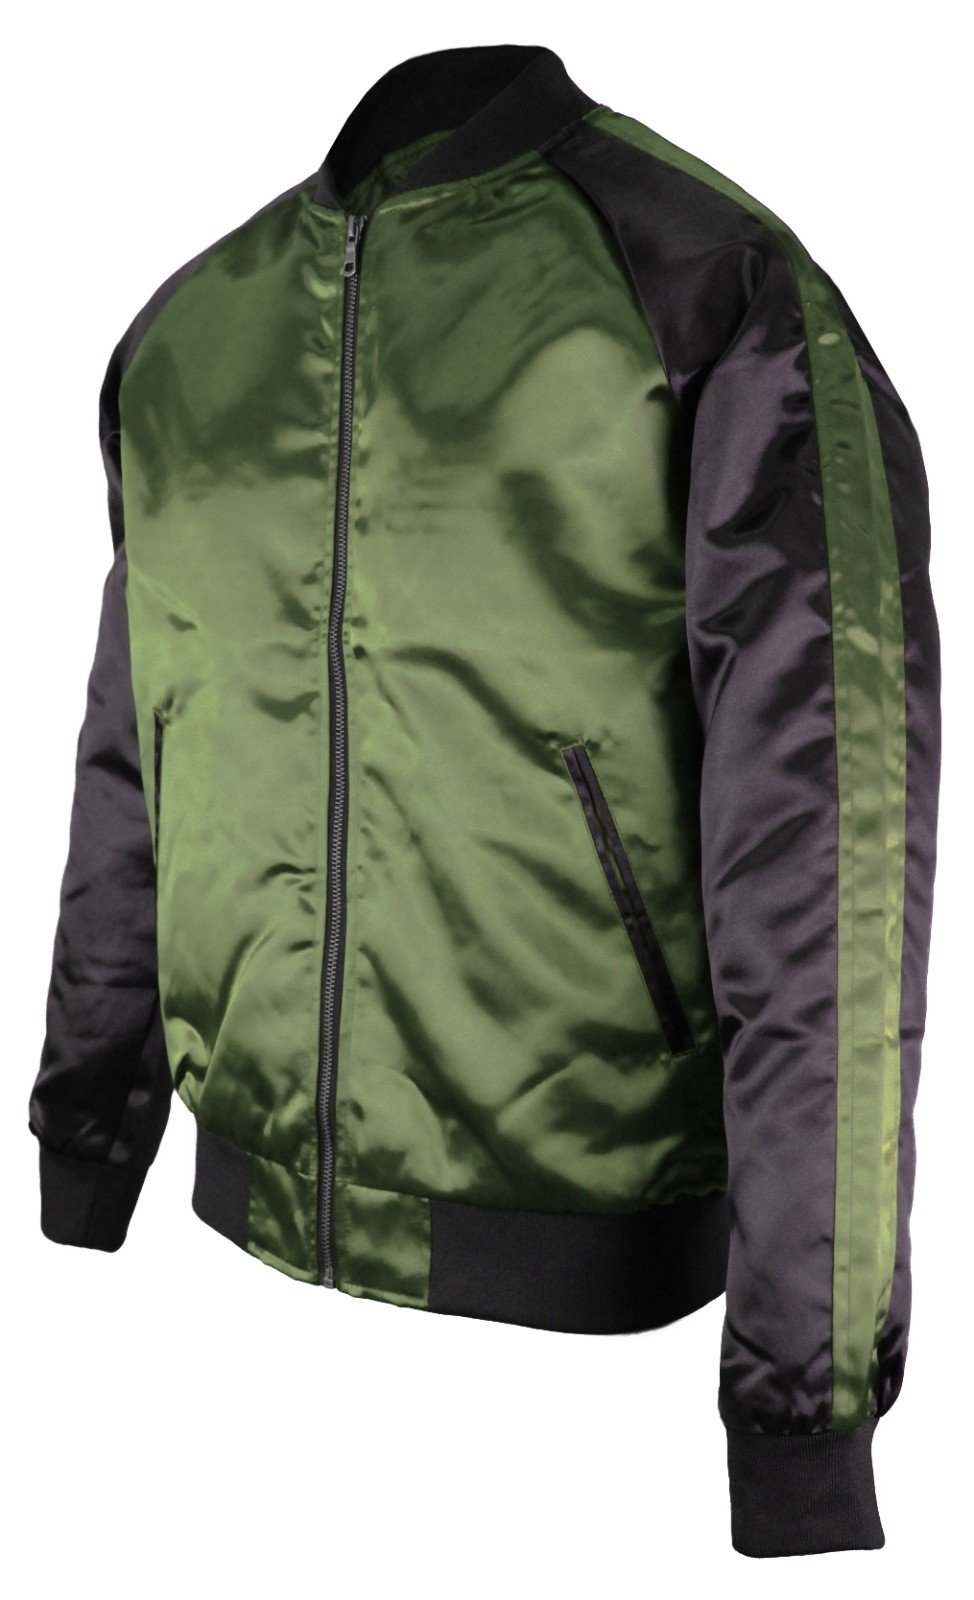 Upscale Mens Zip Up Two Tone Satin Look Bomber Track Jacket Olive/Black